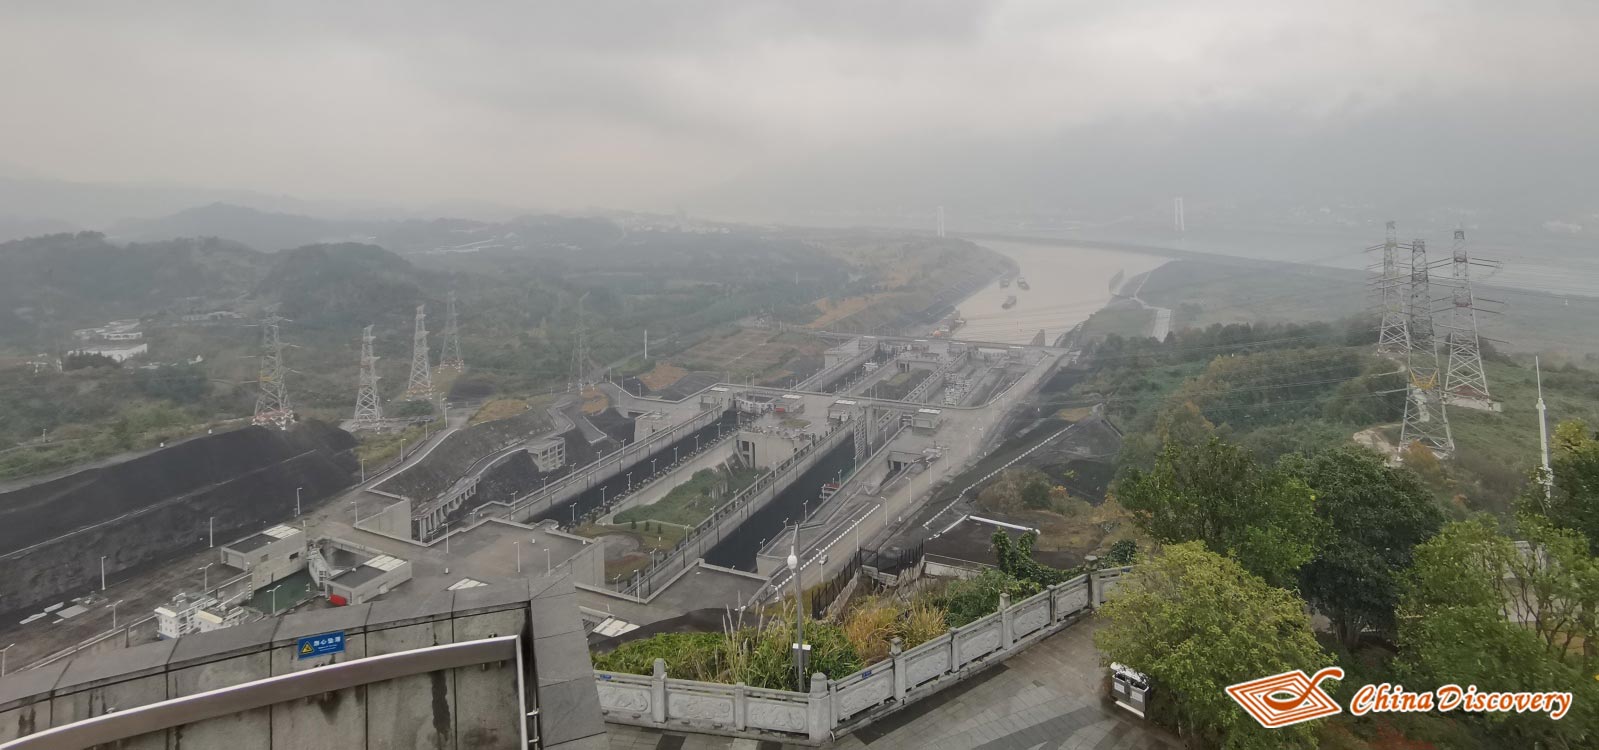 The View of Three Gorges Dam Project from the Top of Tanziling